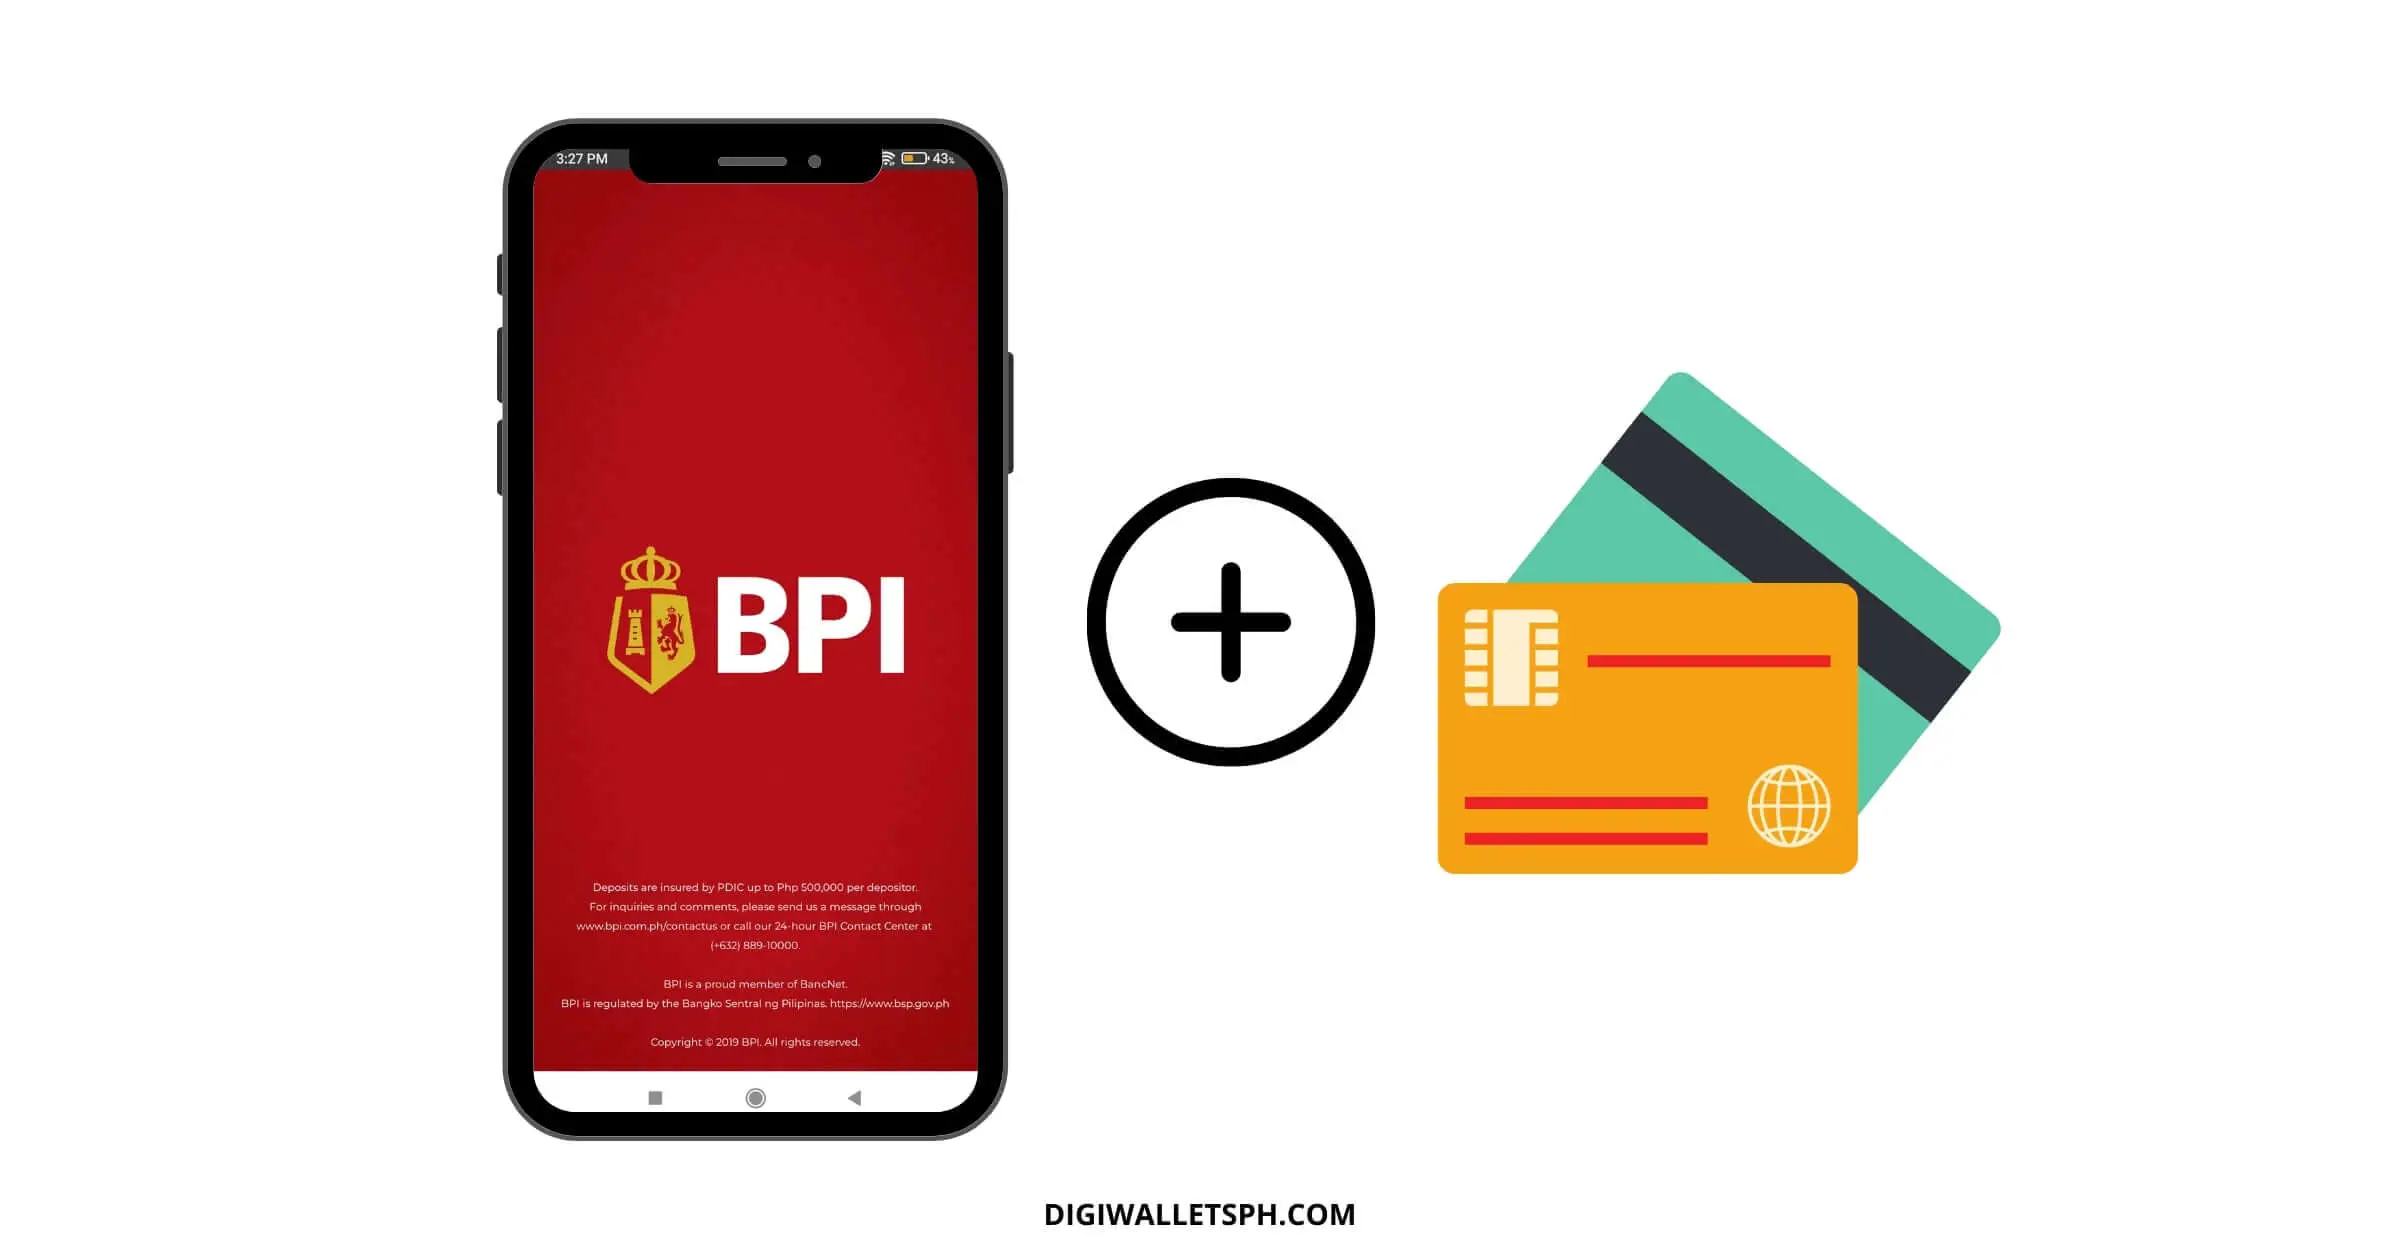 How to enroll account in BPI